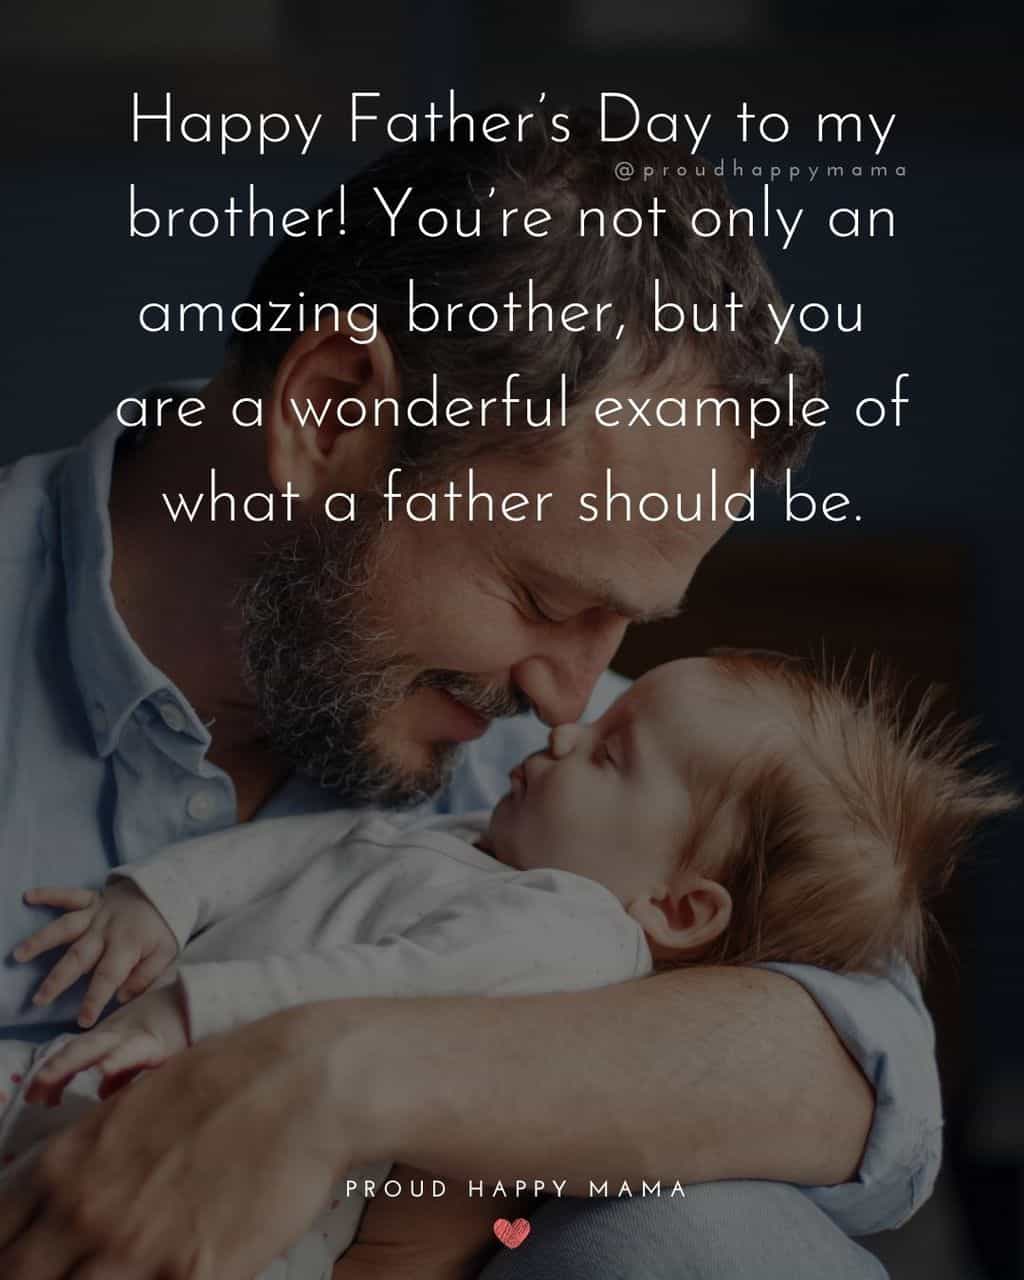 40+ BEST Happy Father’s Day Brother Quotes [With Images]